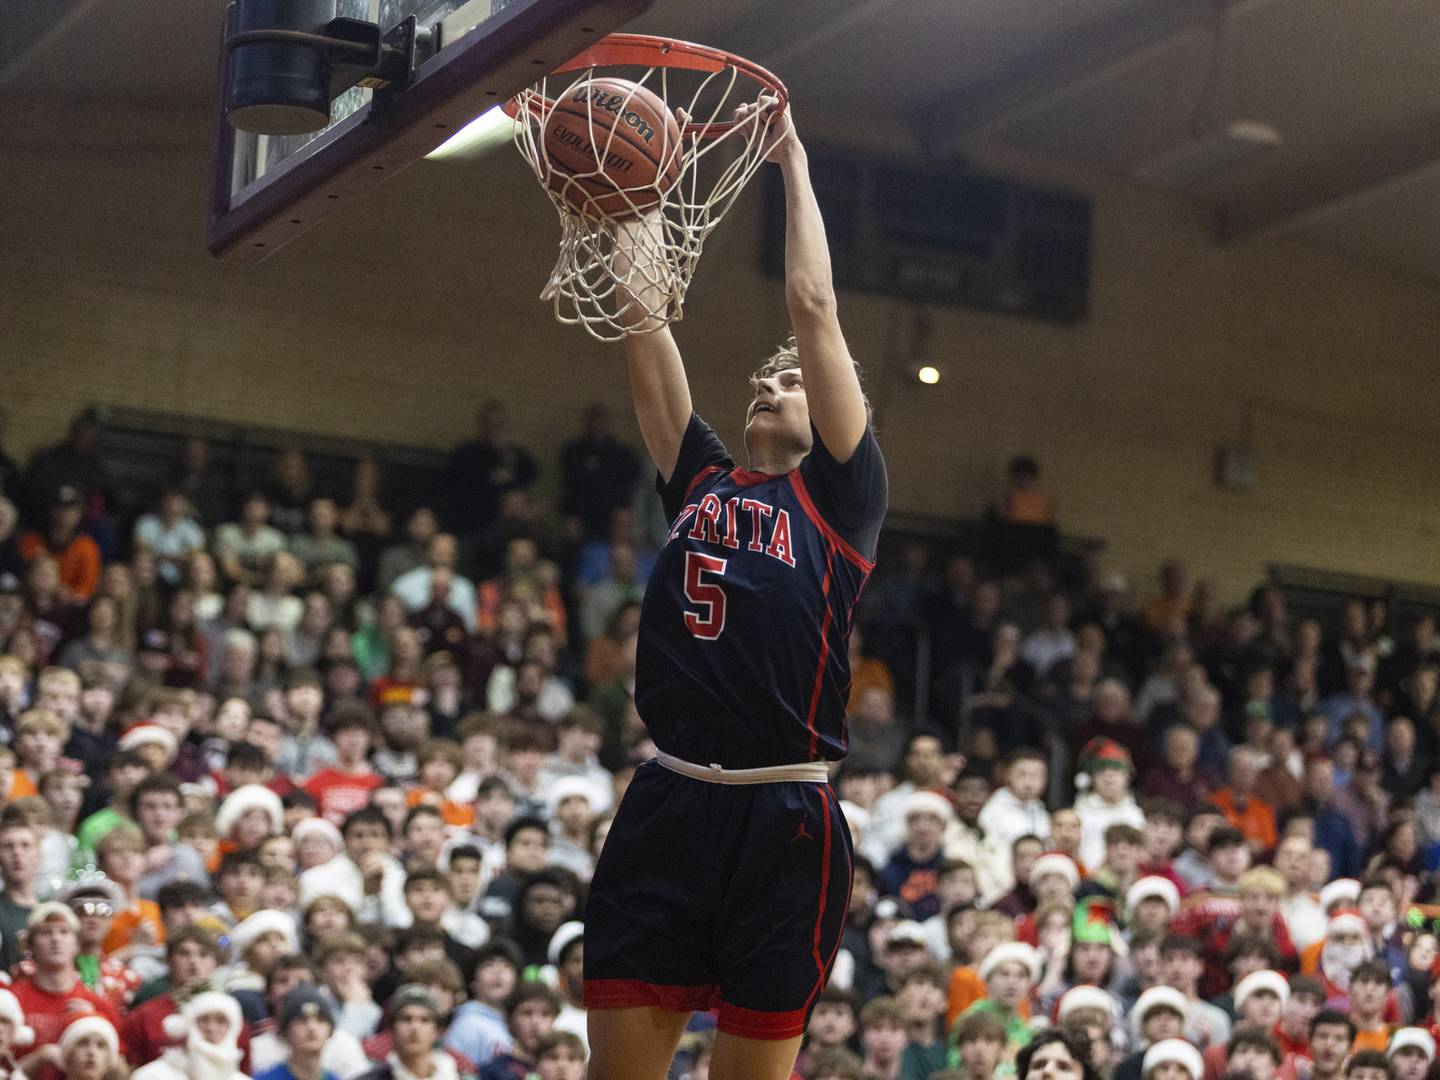 St. Rita's Nojus Indrusaitis (5) dunks against Brother Rice during a Catholic League Blue game in Chicago on Thursday, Dec. 9, 2022.